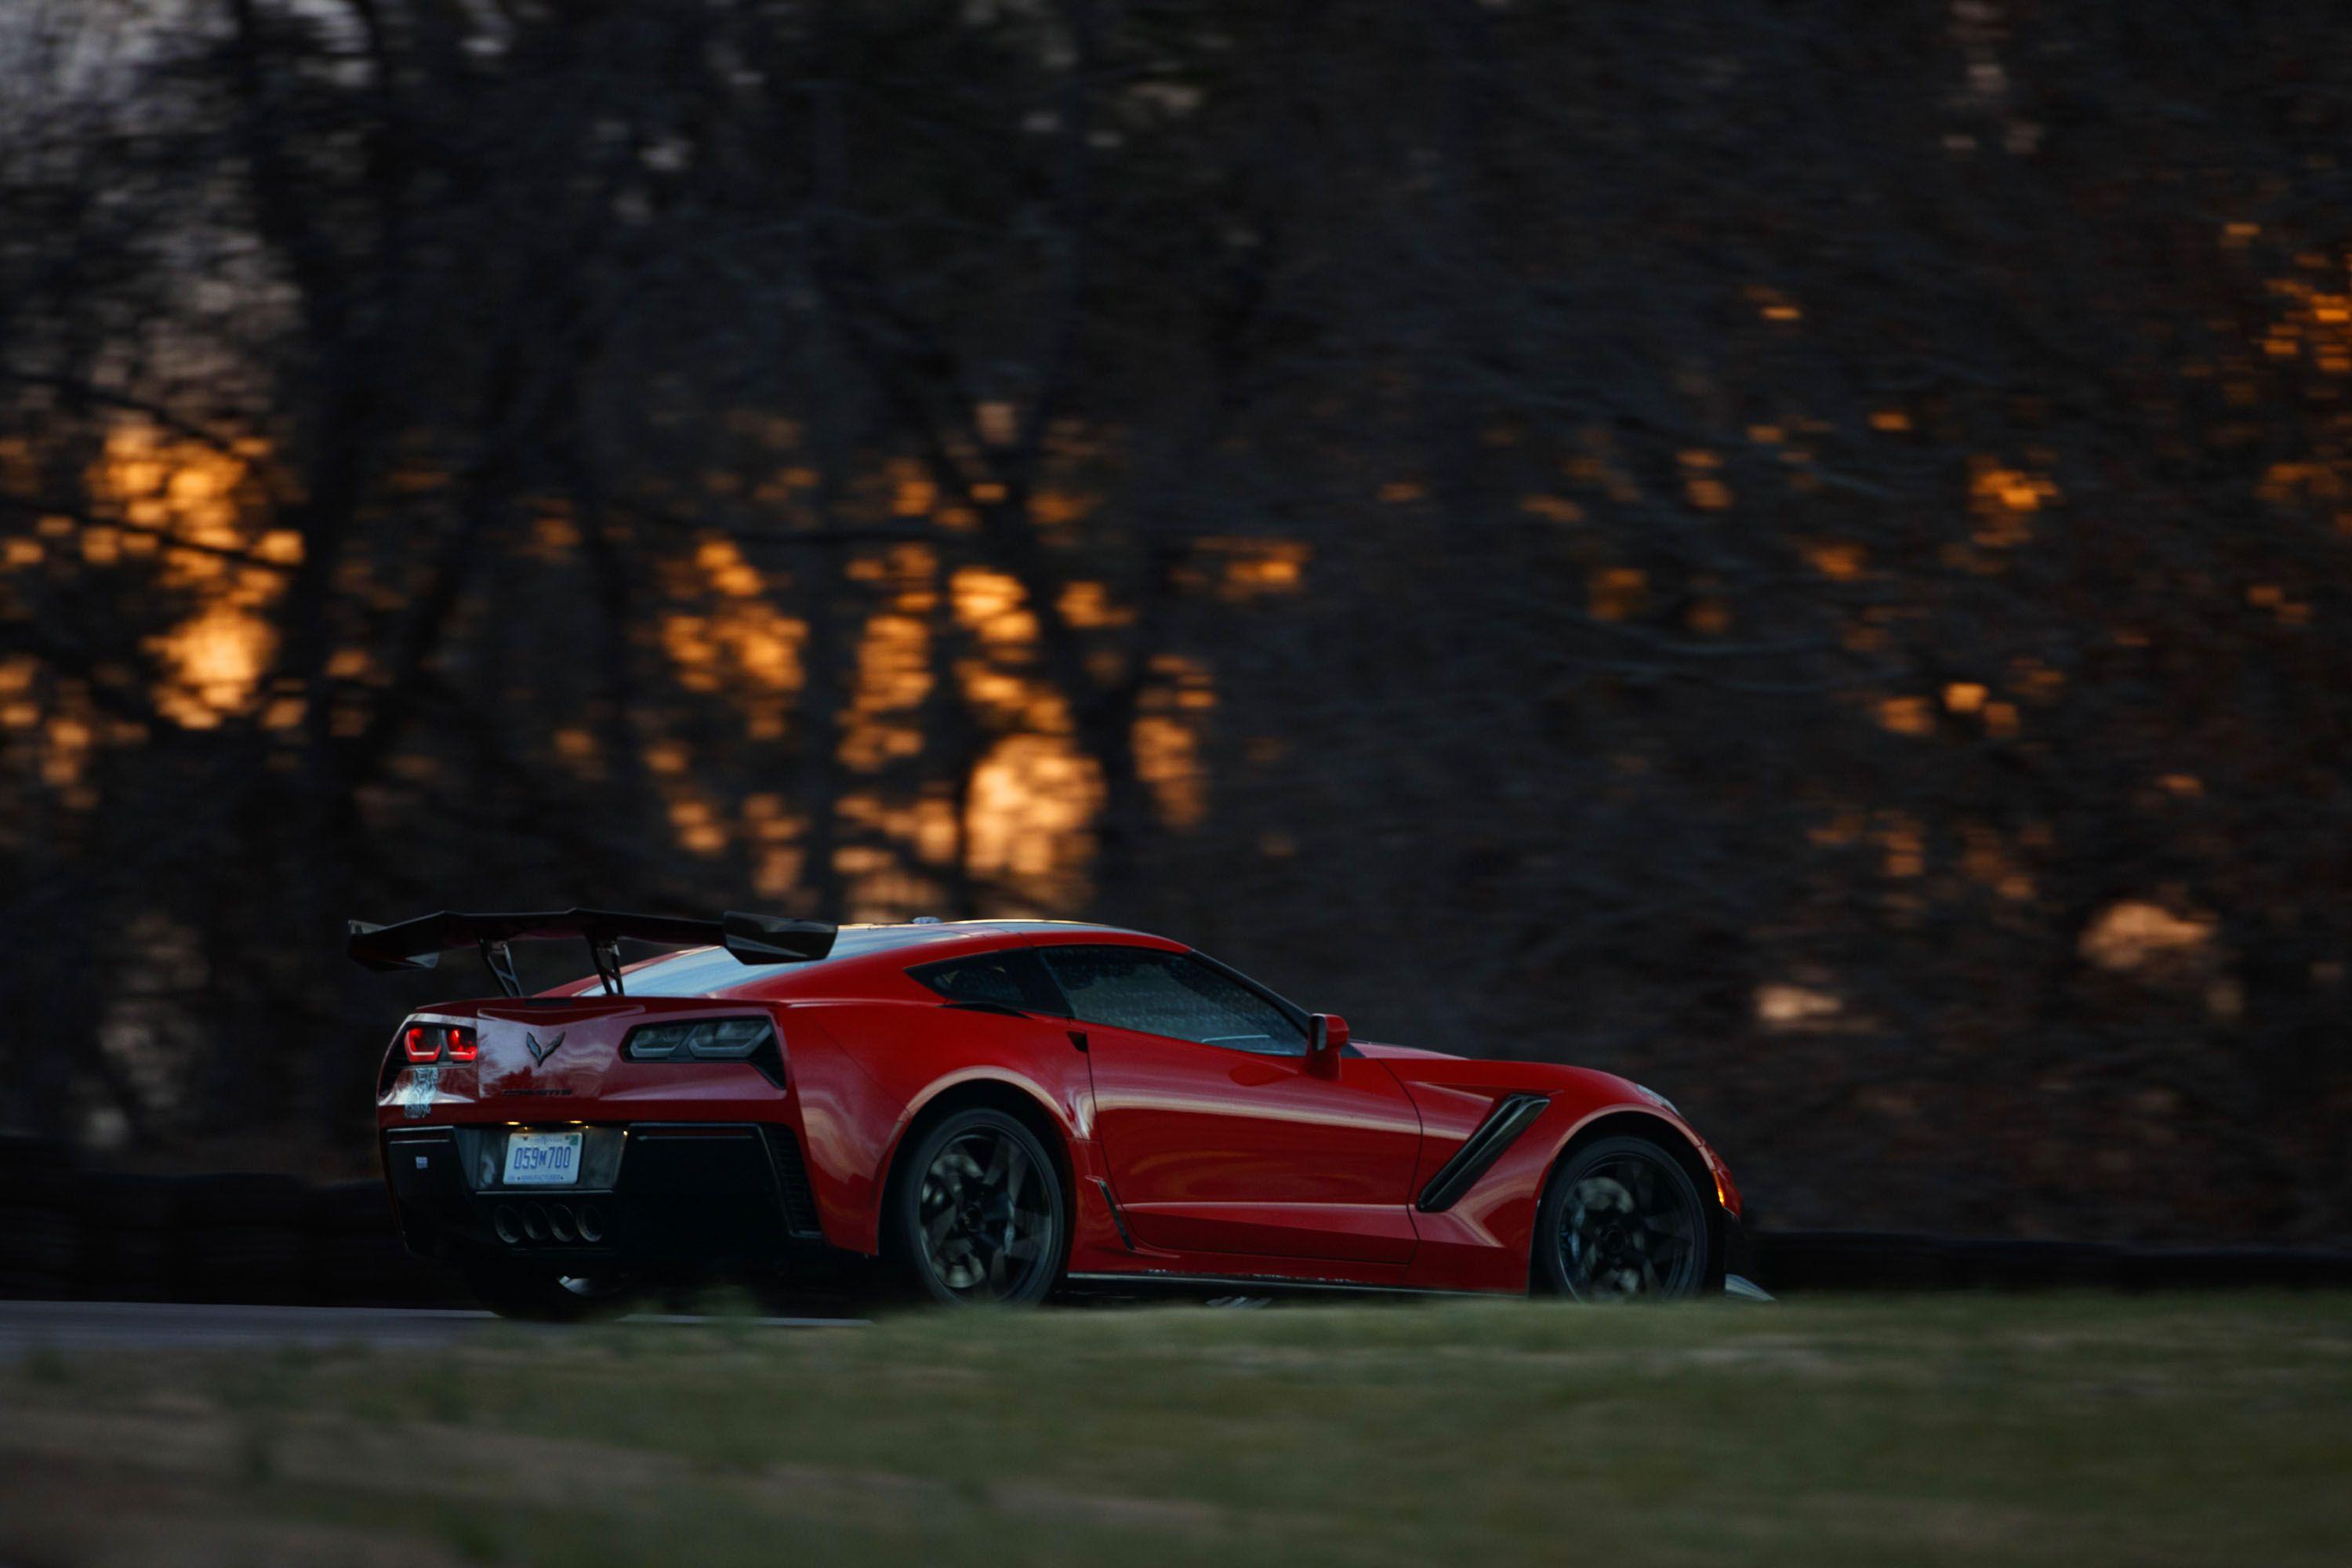 Wallpaper Of The Day: 2019 Chevy Corvette ZR1 Picture, Photo